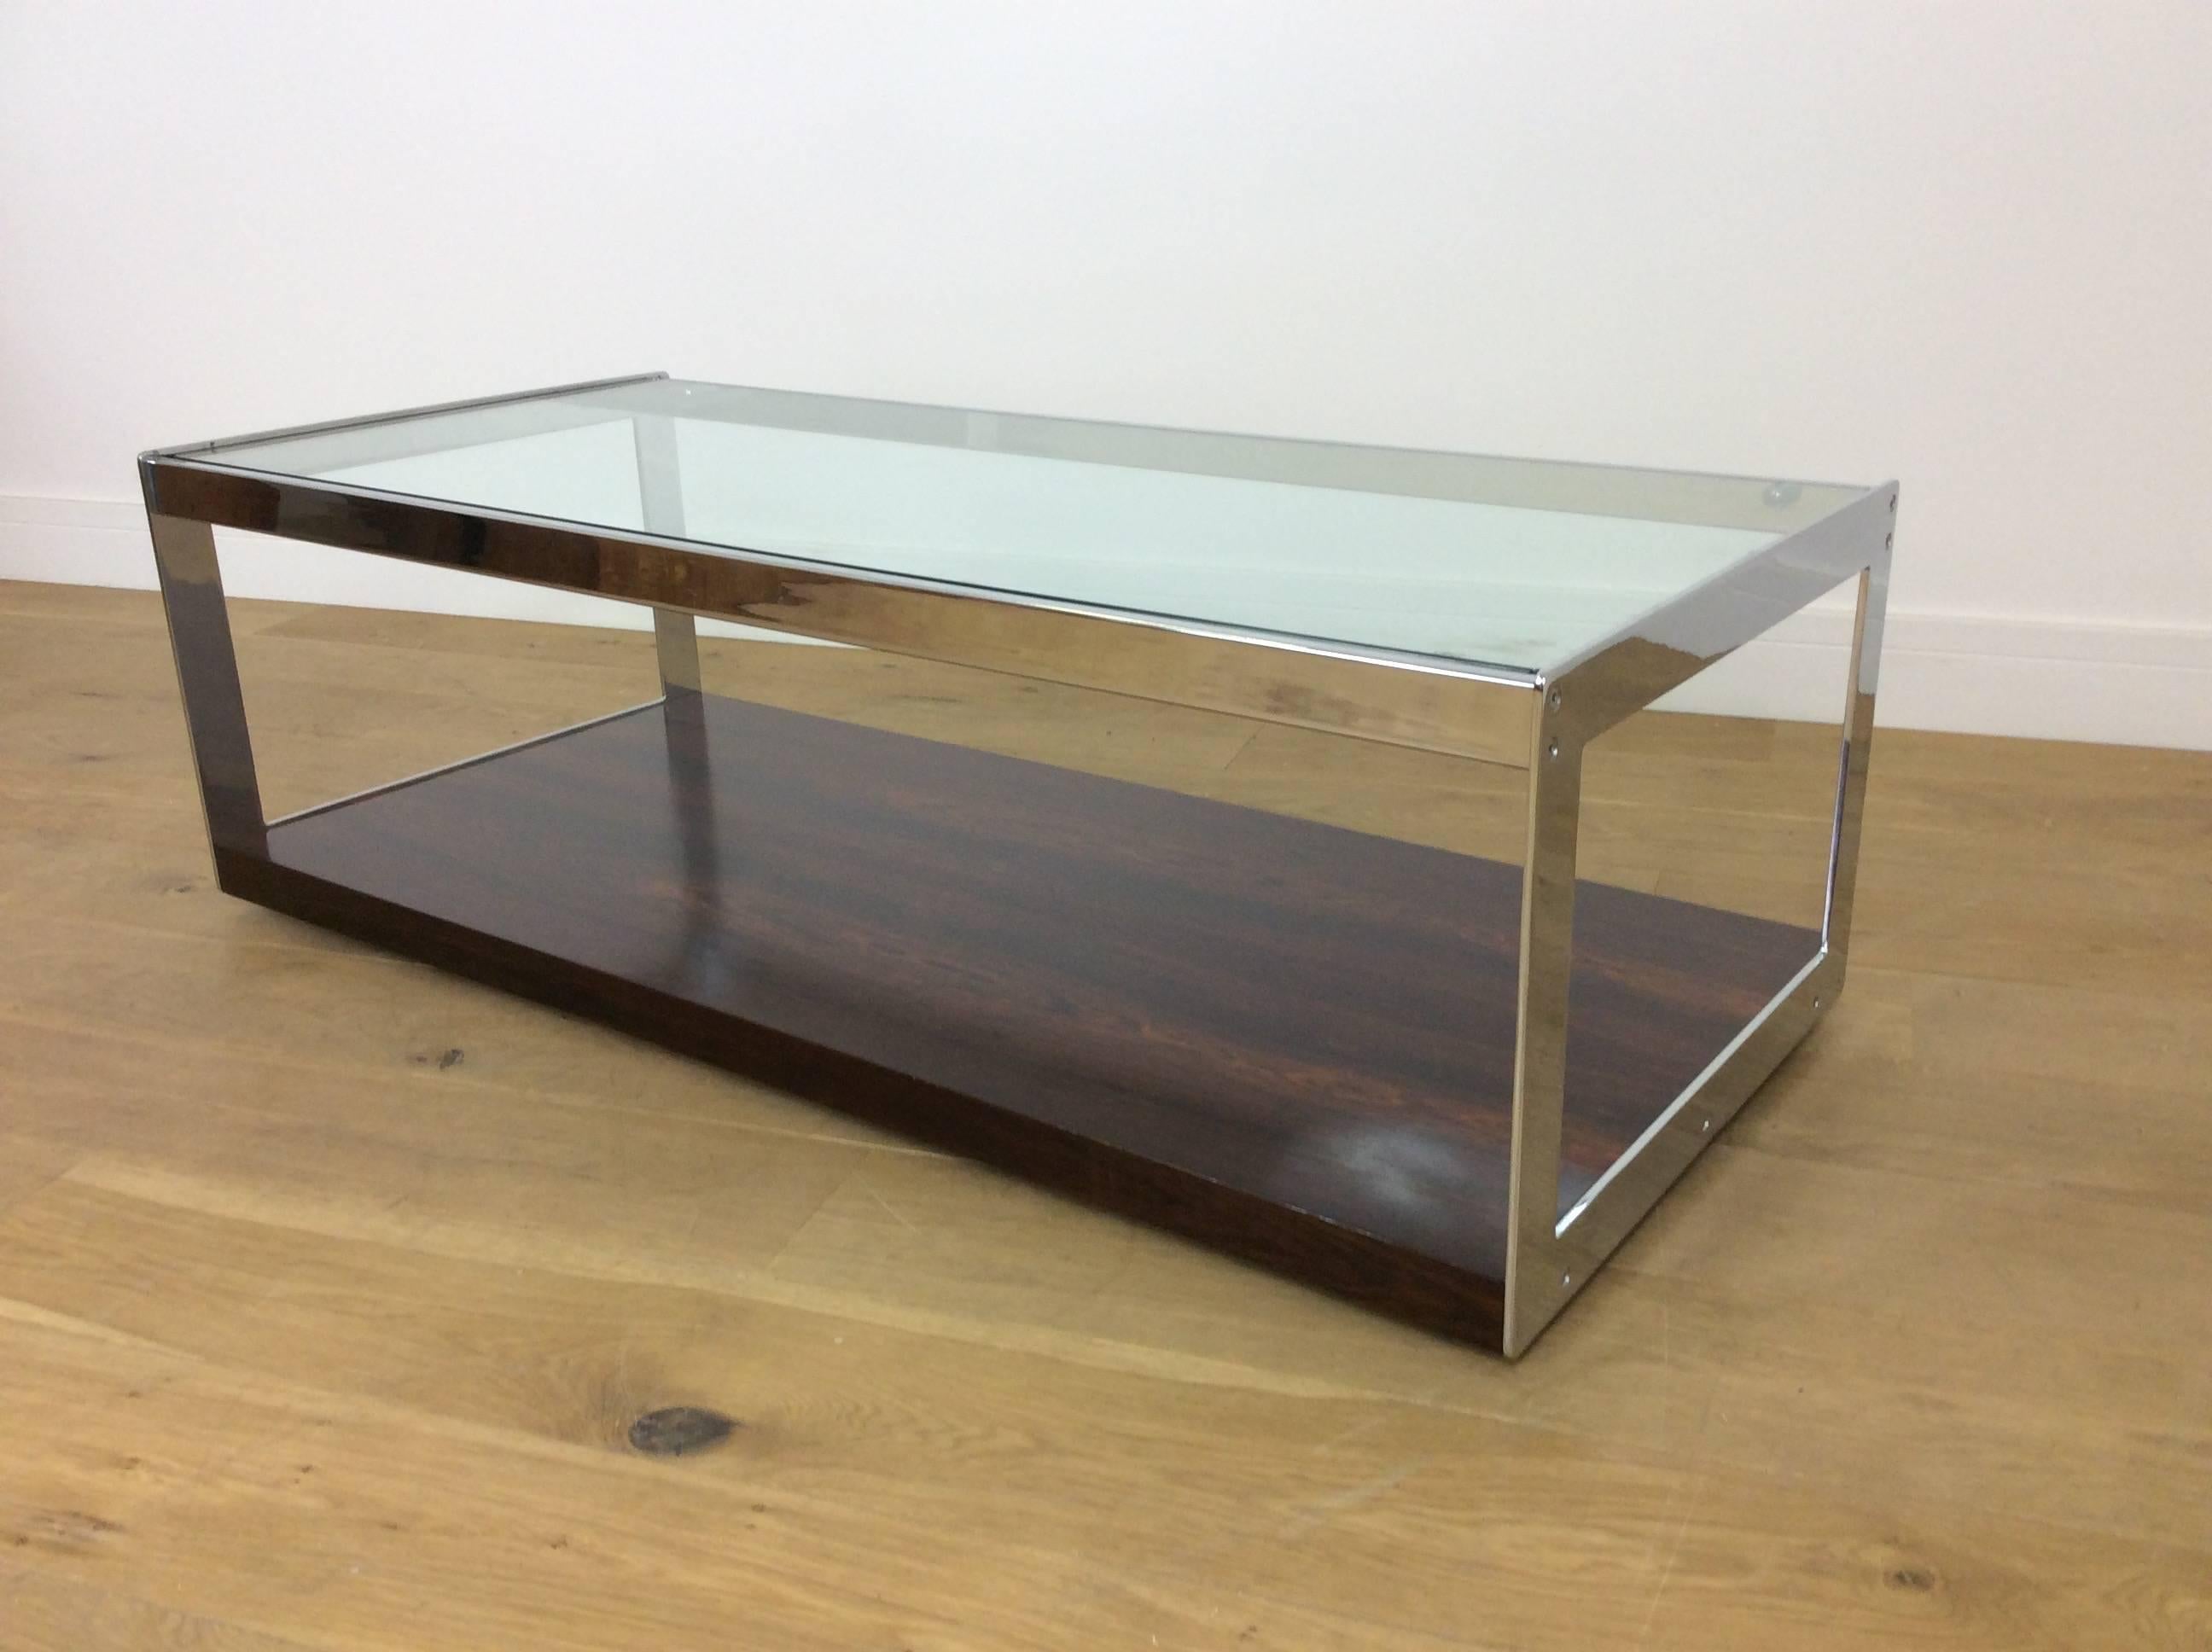 English Midcentury Rosewood Chrome and Glass Table by Merrow Associates